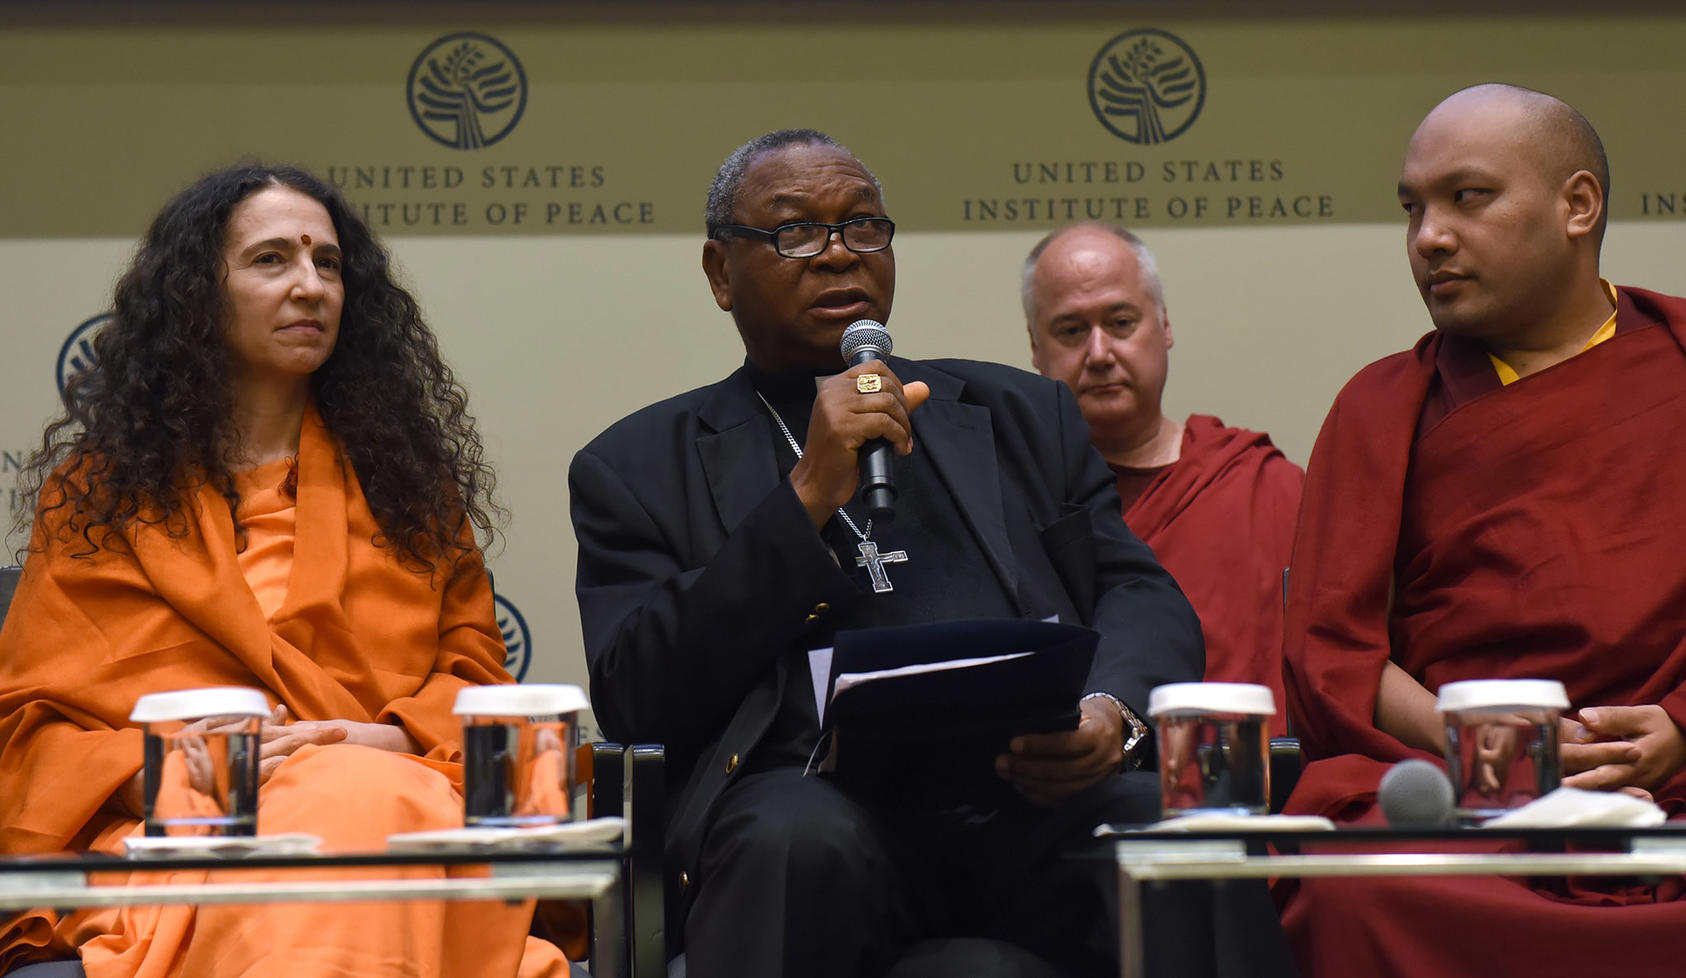 Nigerian Catholic Archbishop John Onaiyekan spoke with Hindu and Buddhist leaders at a 2018 conference on ways to advance religious freedoms. Onaiyekan helps lead a USIP-supported initiative to calm violence committed in the name of religion in Nigeria.